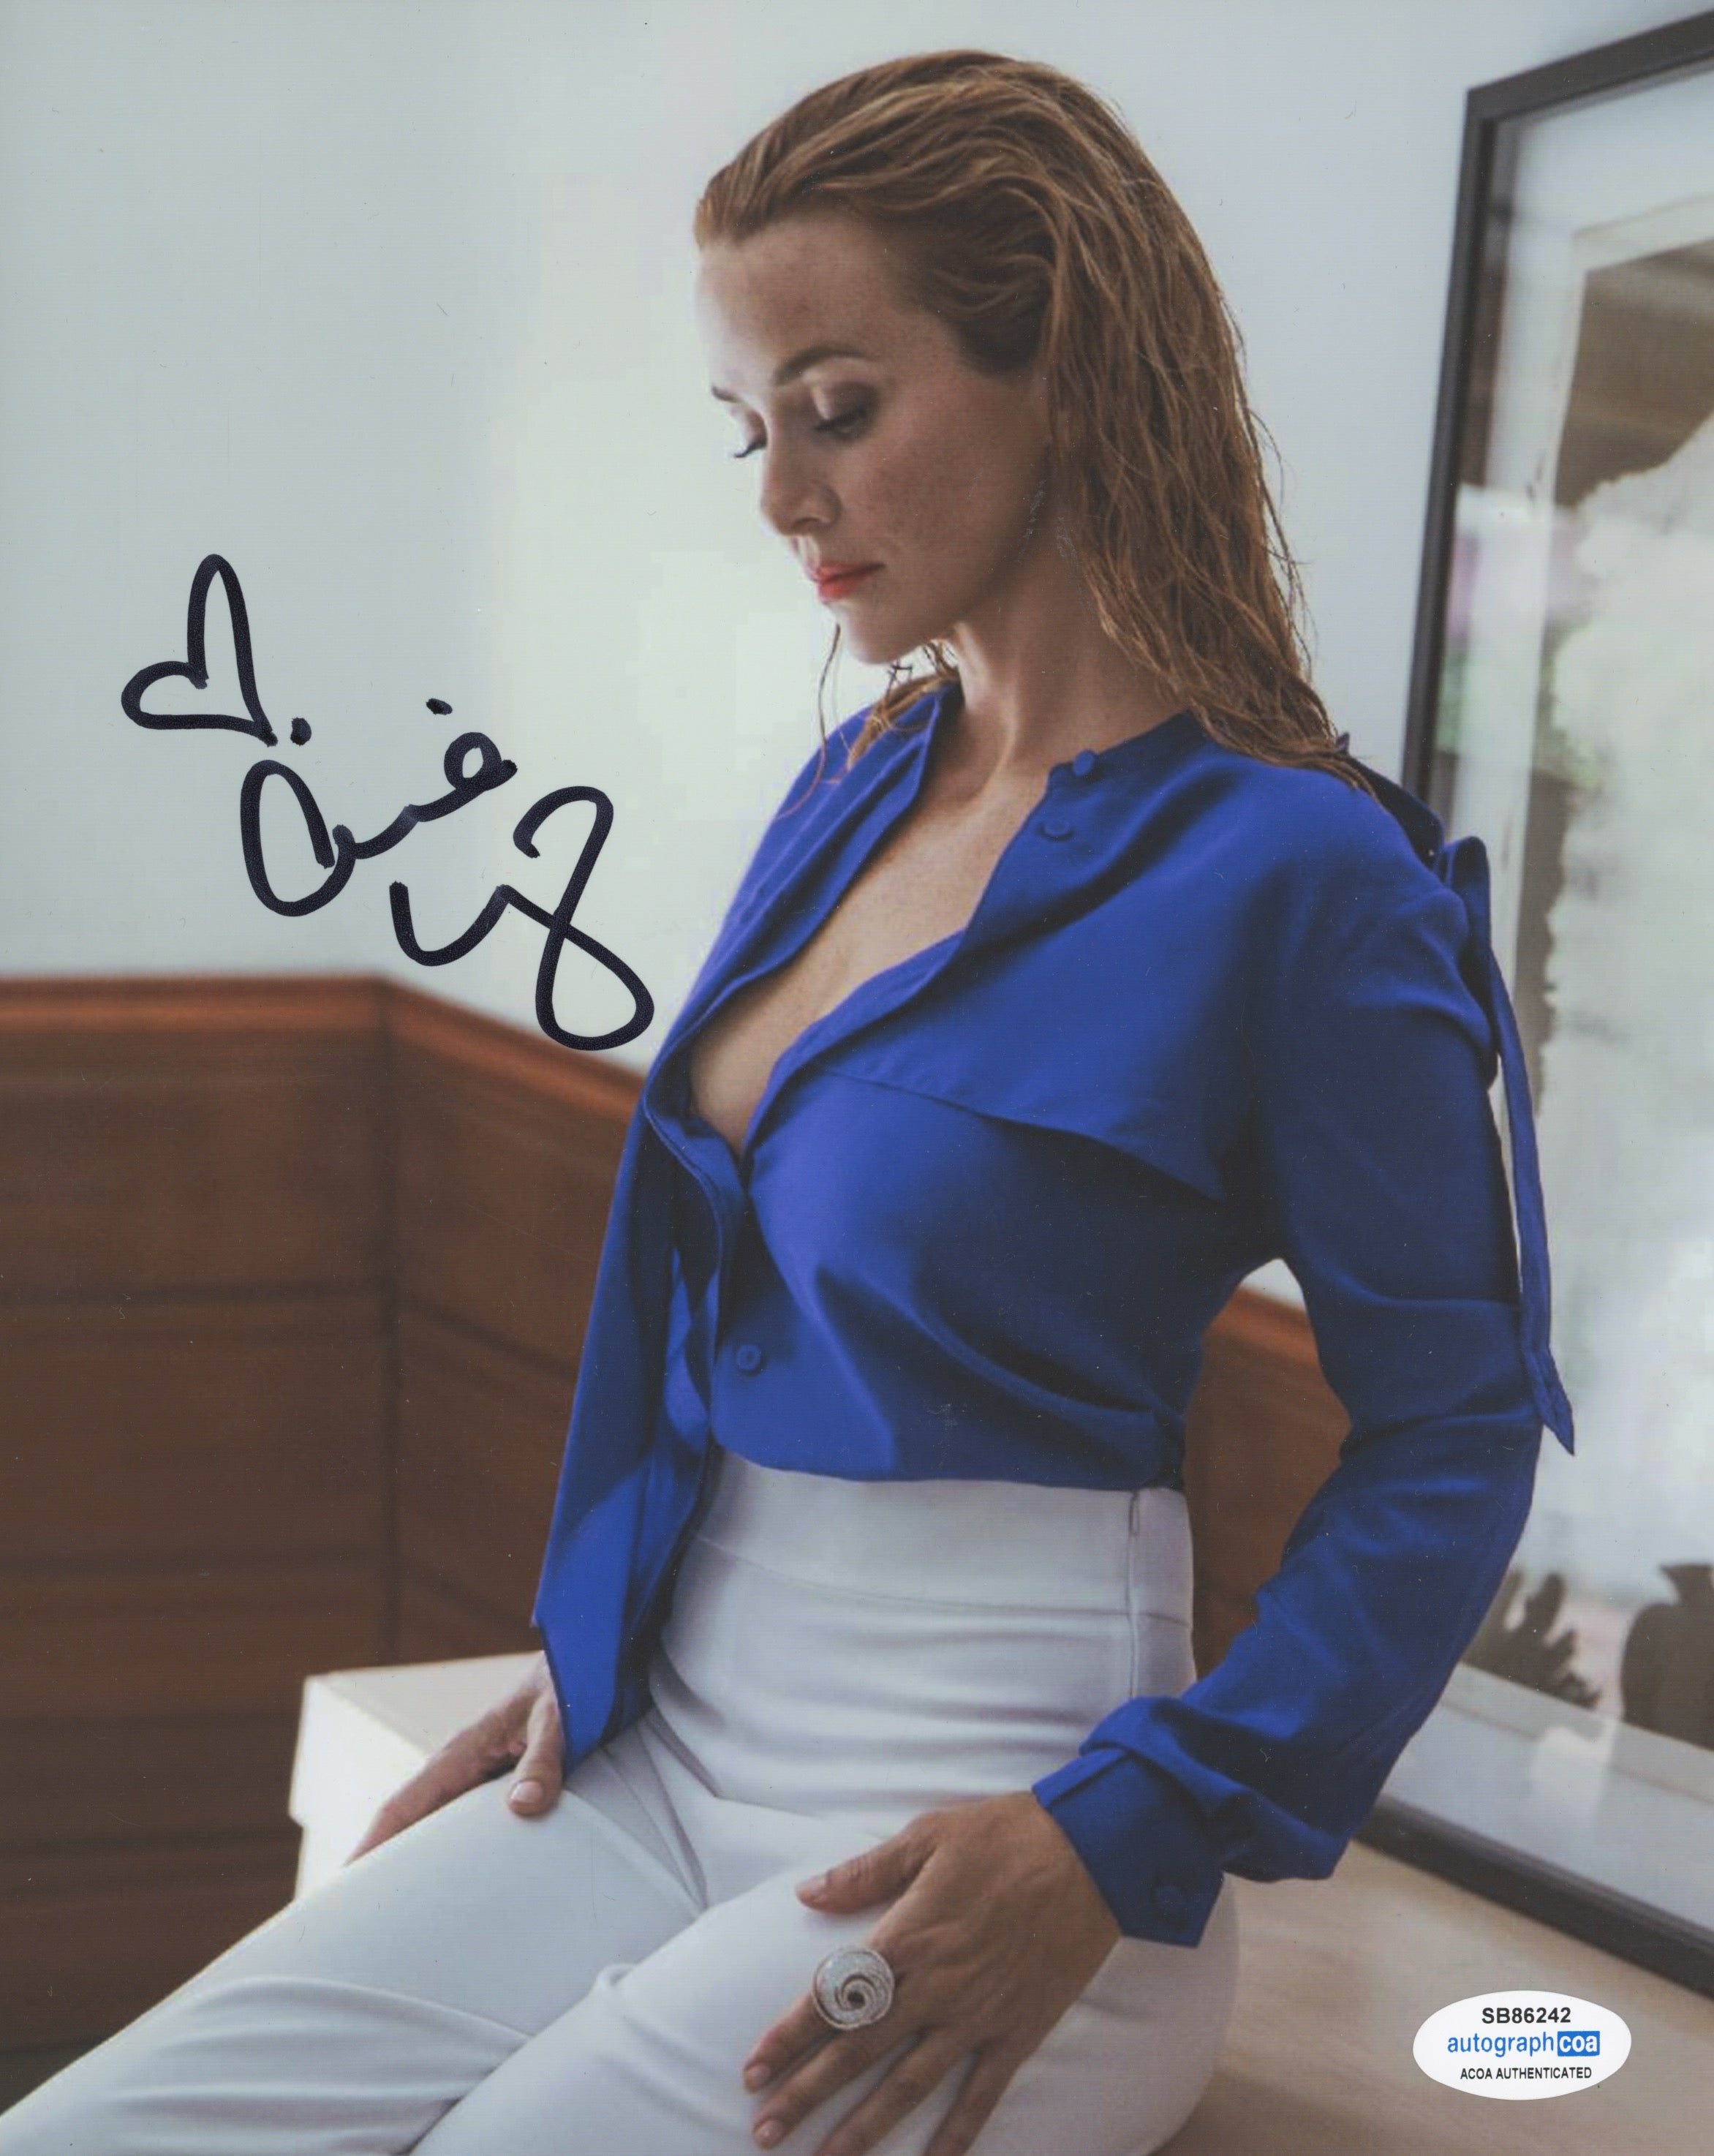 brian bertin recommends annie wersching sexy pic